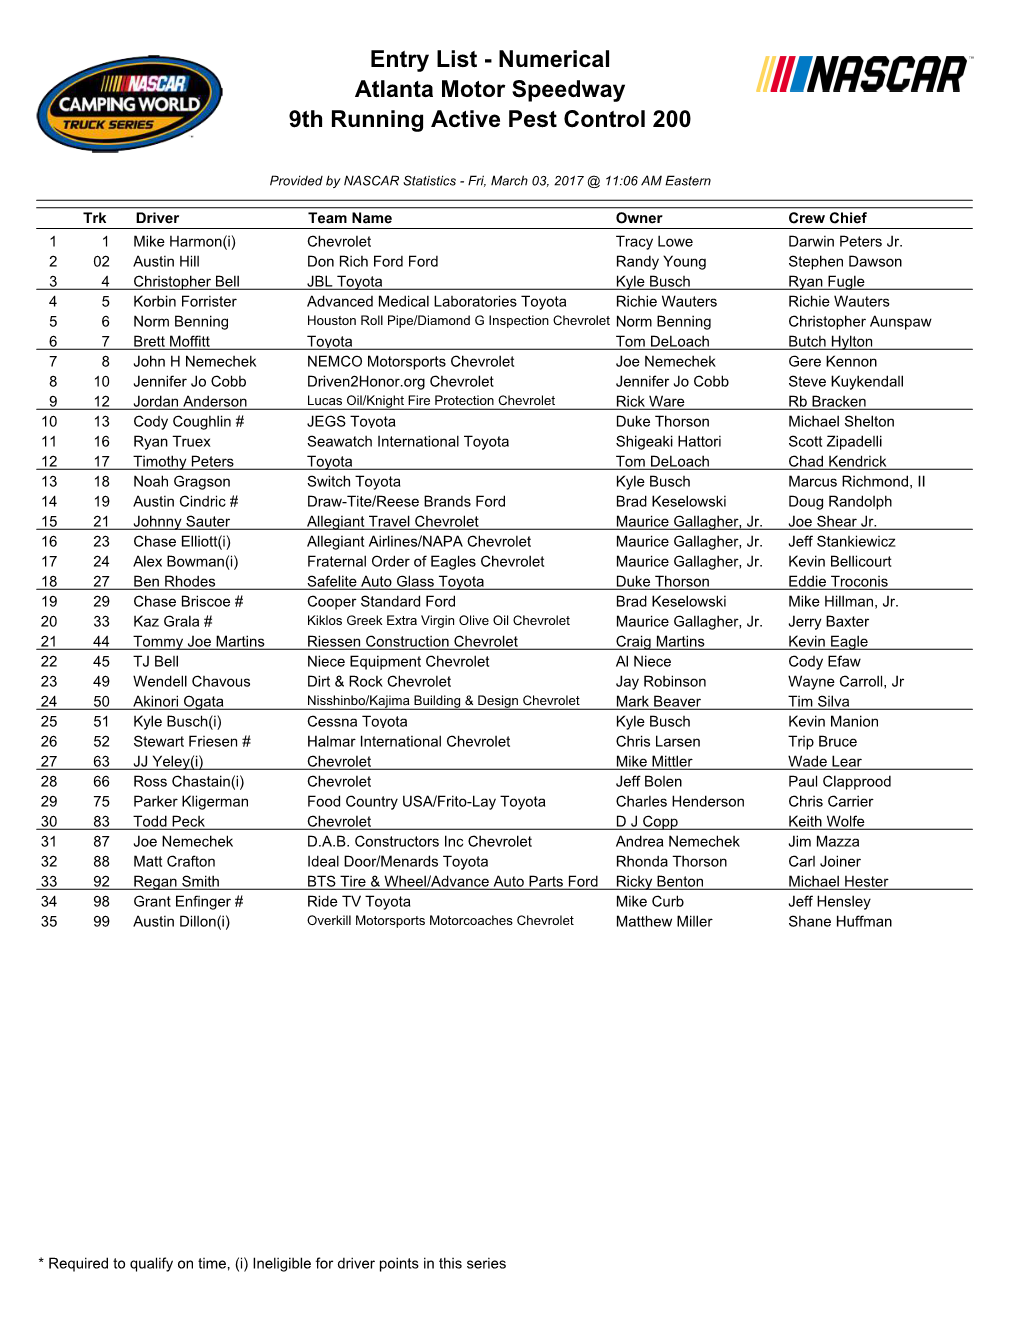 Entry List - Numerical Atlanta Motor Speedway 9Th Running Active Pest Control 200